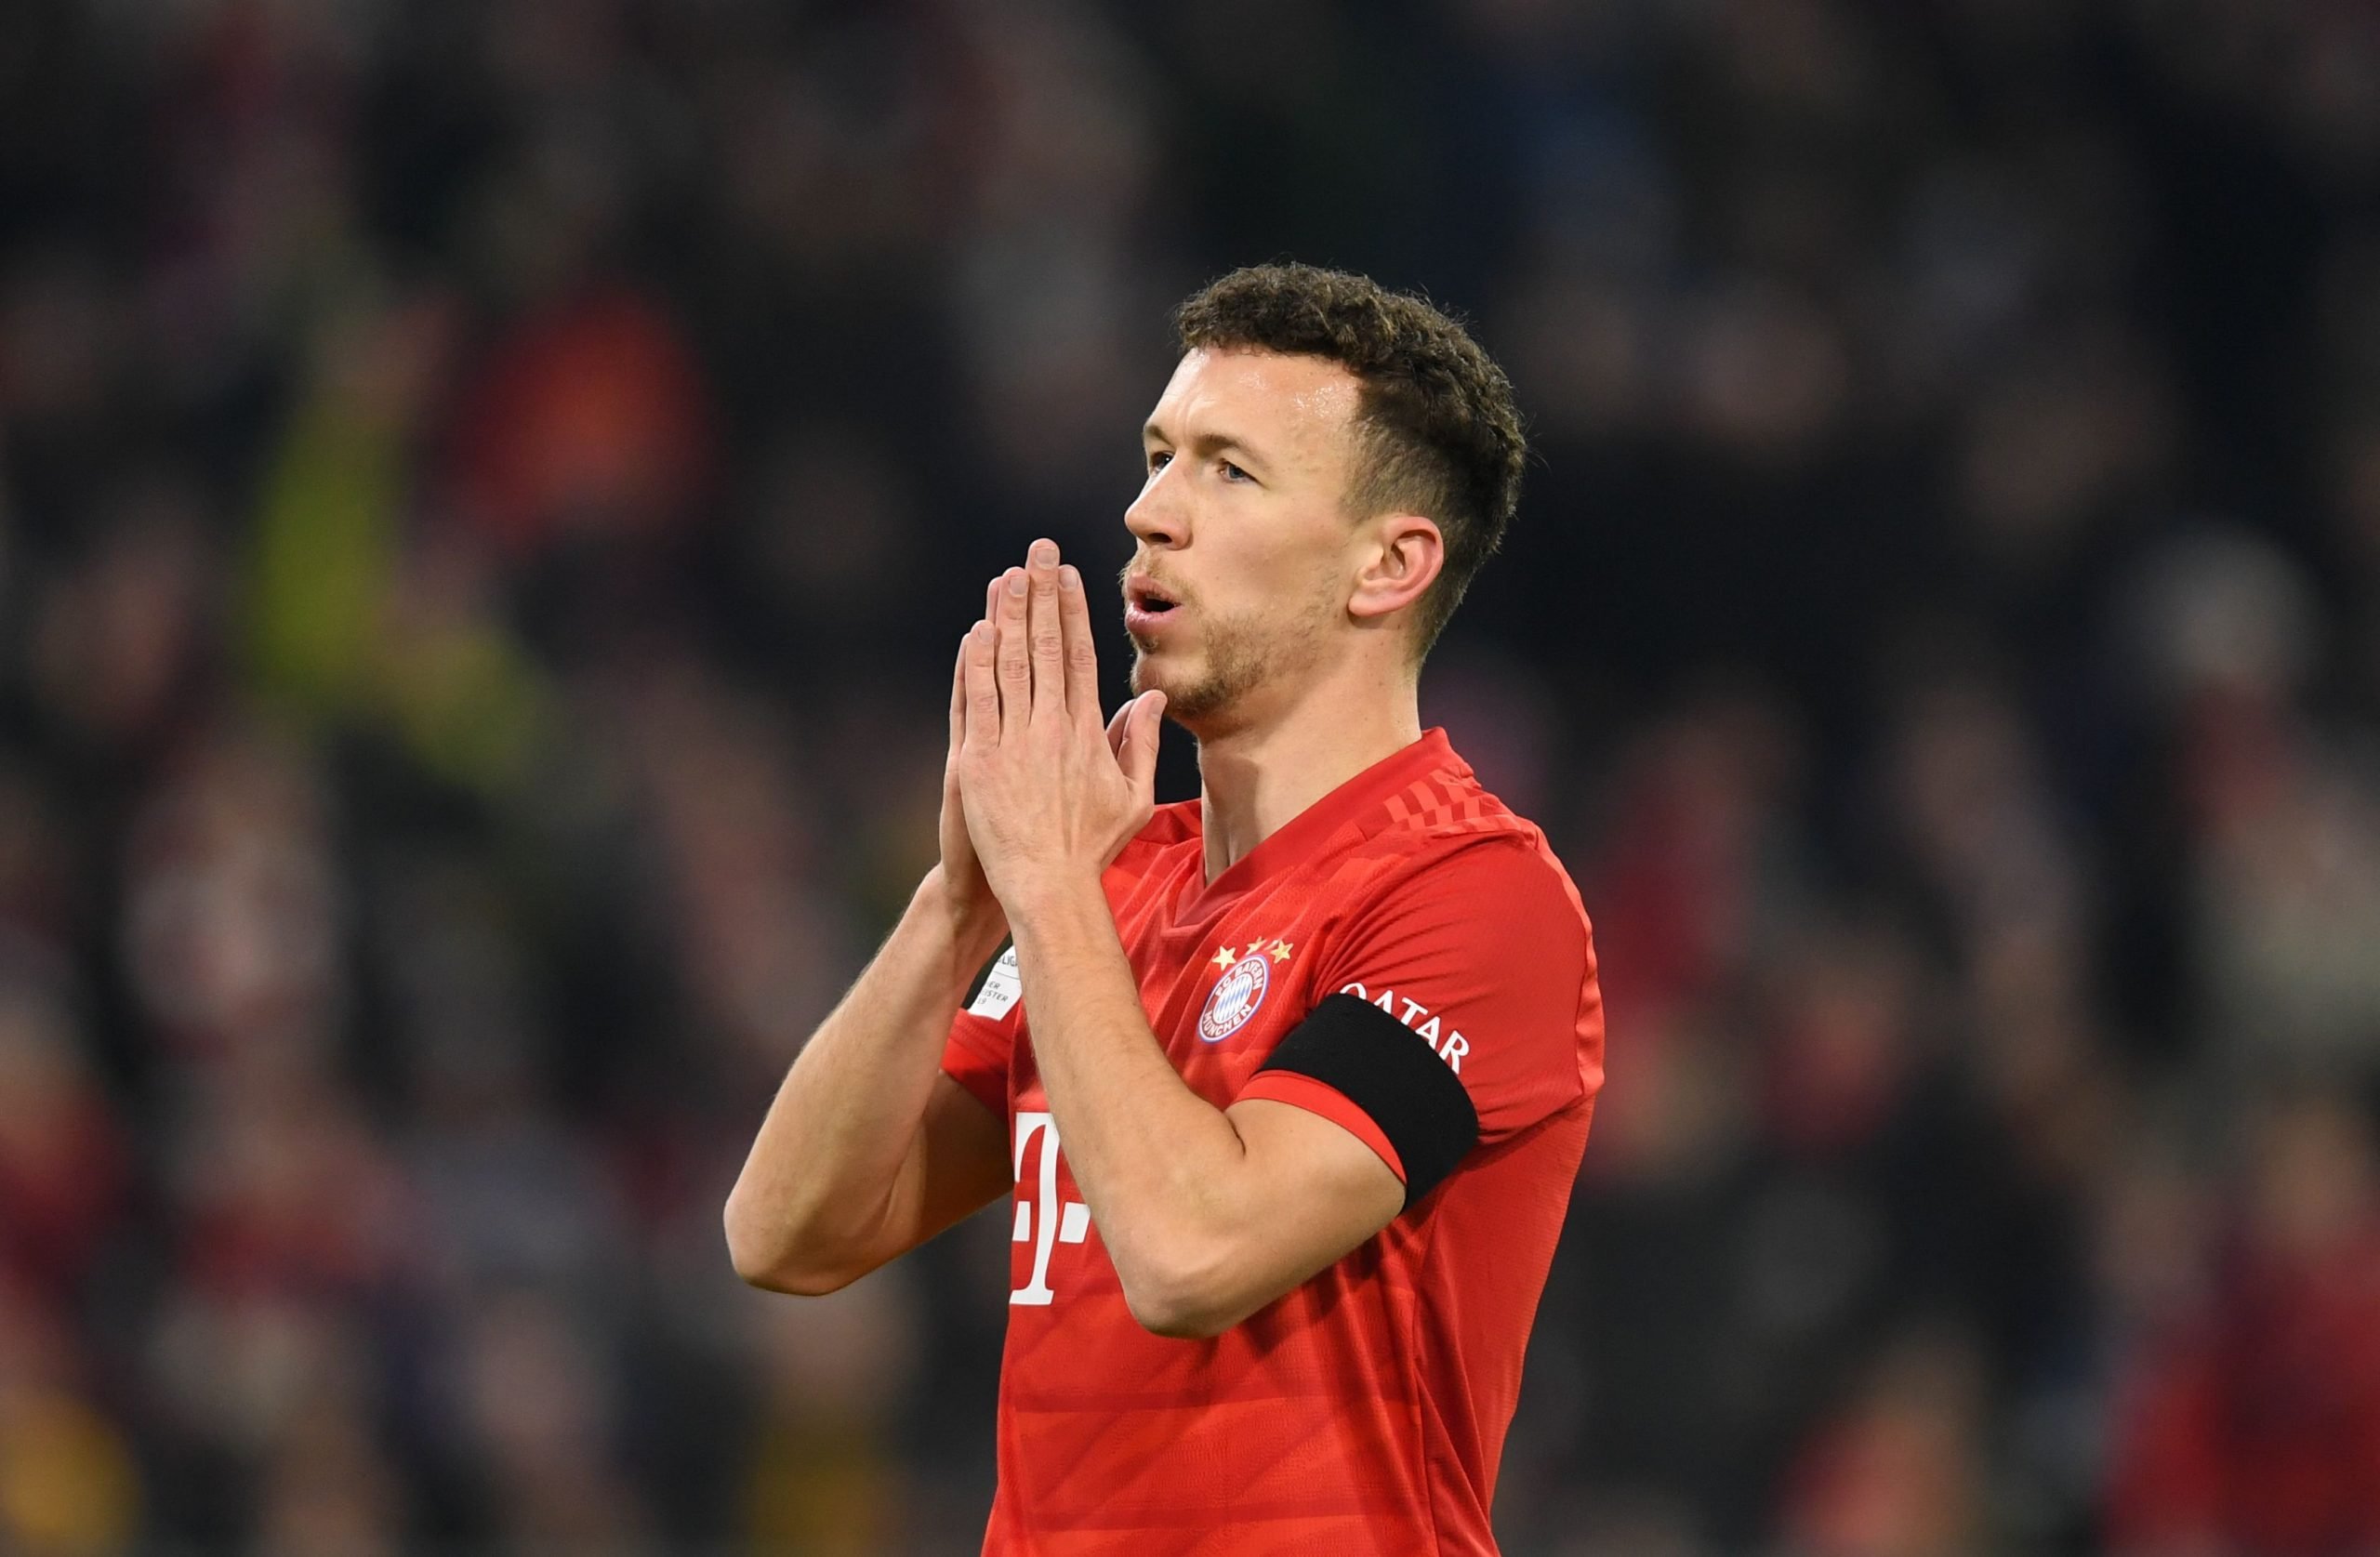 Tottenham are keen on securing the services of Ivan Perisic - He hasn't found much luck at Bayern.